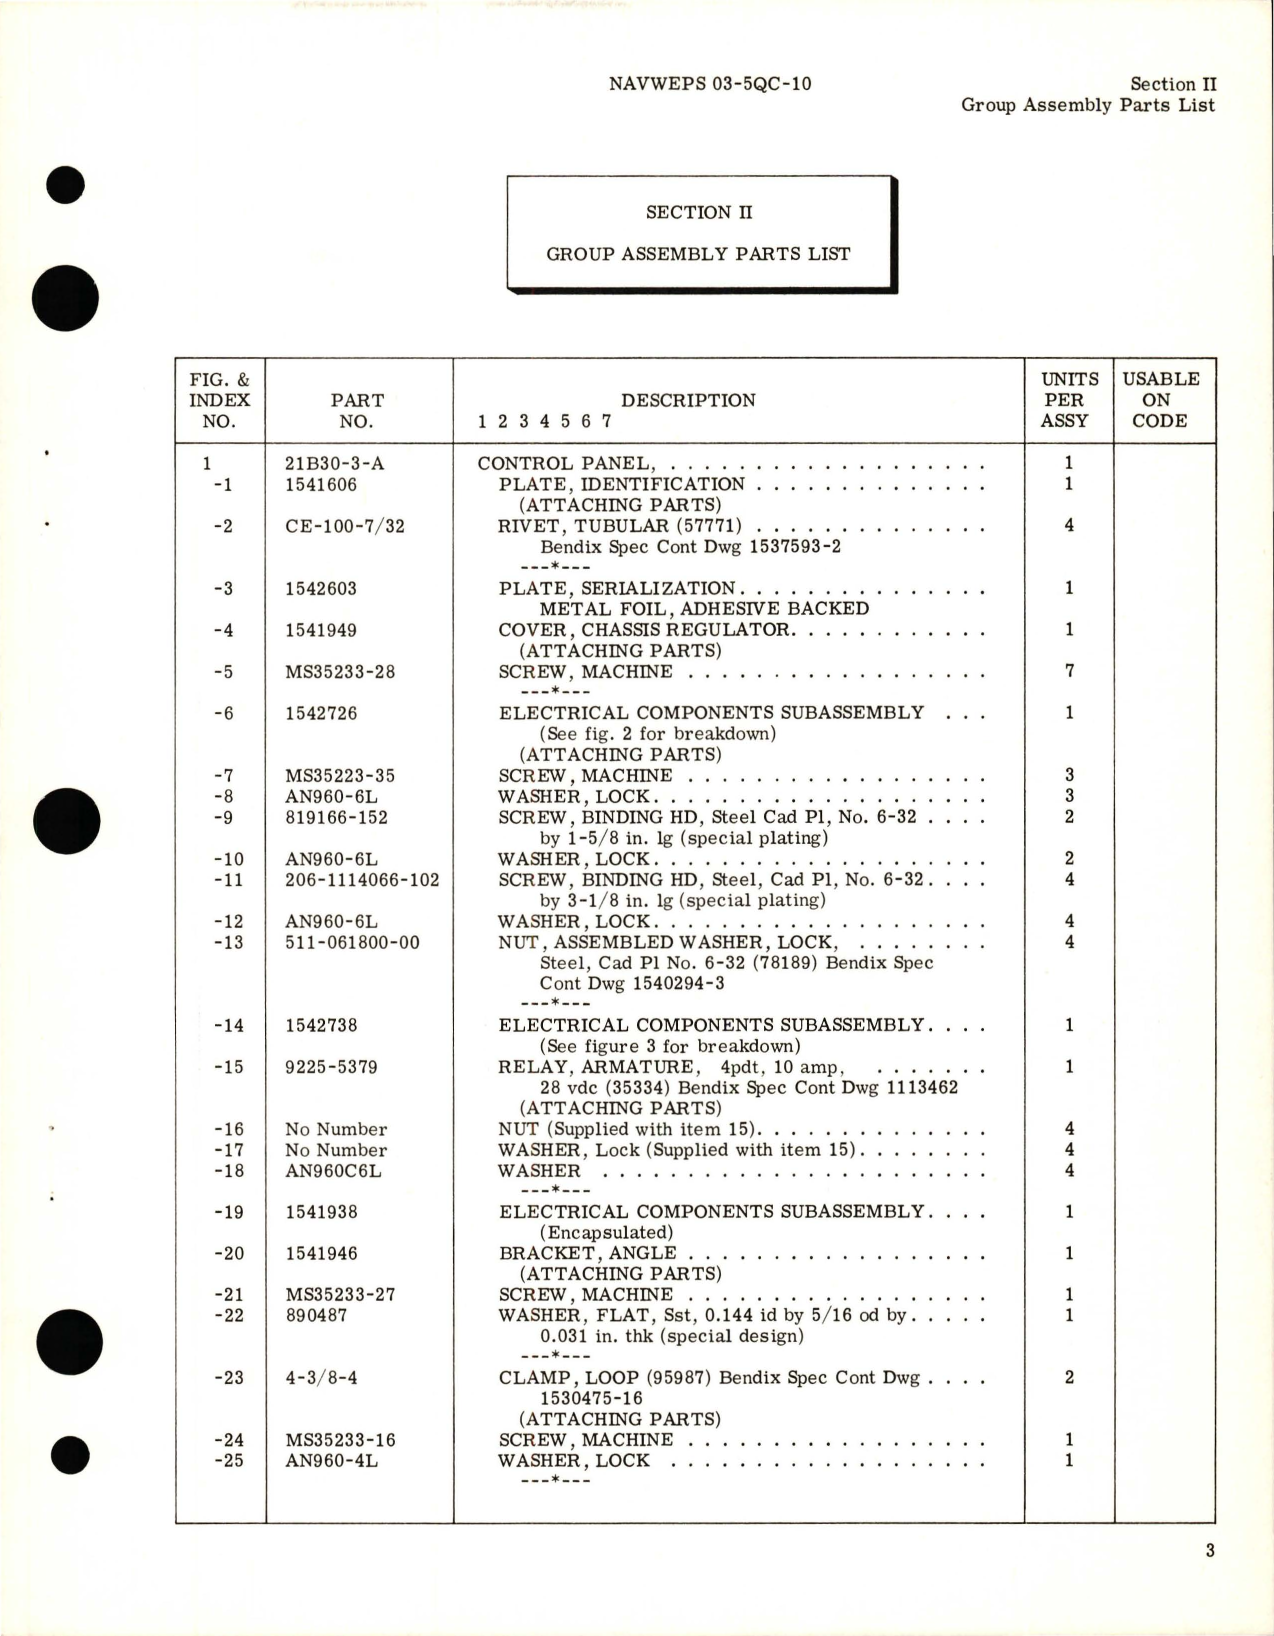 Sample page 5 from AirCorps Library document: Illustrated Parts Breakdown for Control Panel - Type 21B30-3-A